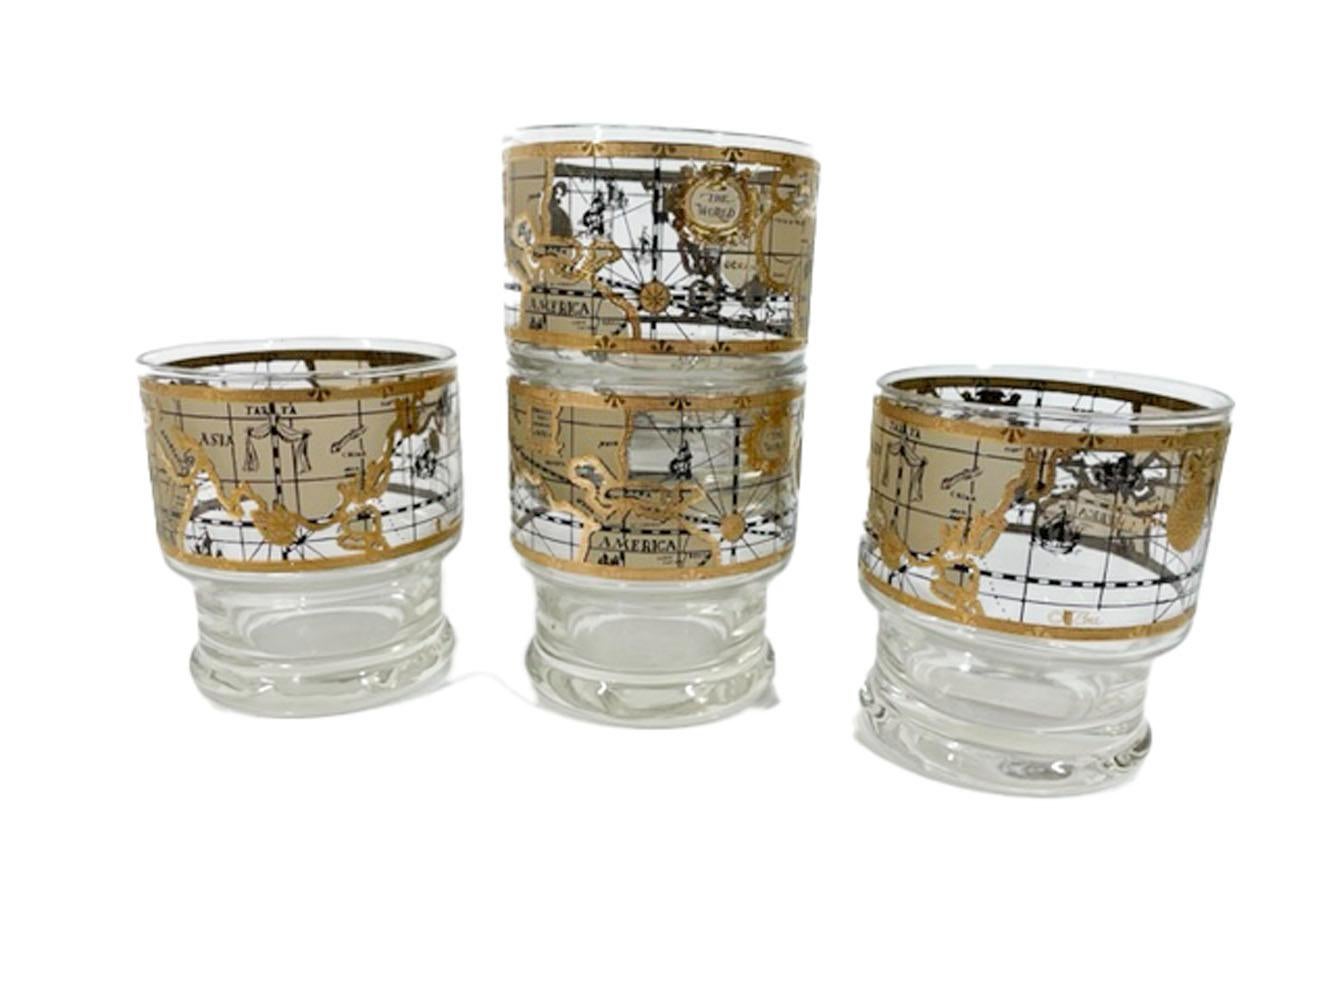 Set of 4 Mid-Century Modern stacking / footed rocks glasses by Cera in the Old World Map pattern, with a map designed to look like an antique map on parchment in tans and 22k gold.

We have multiple listings for the old world map pattern in other